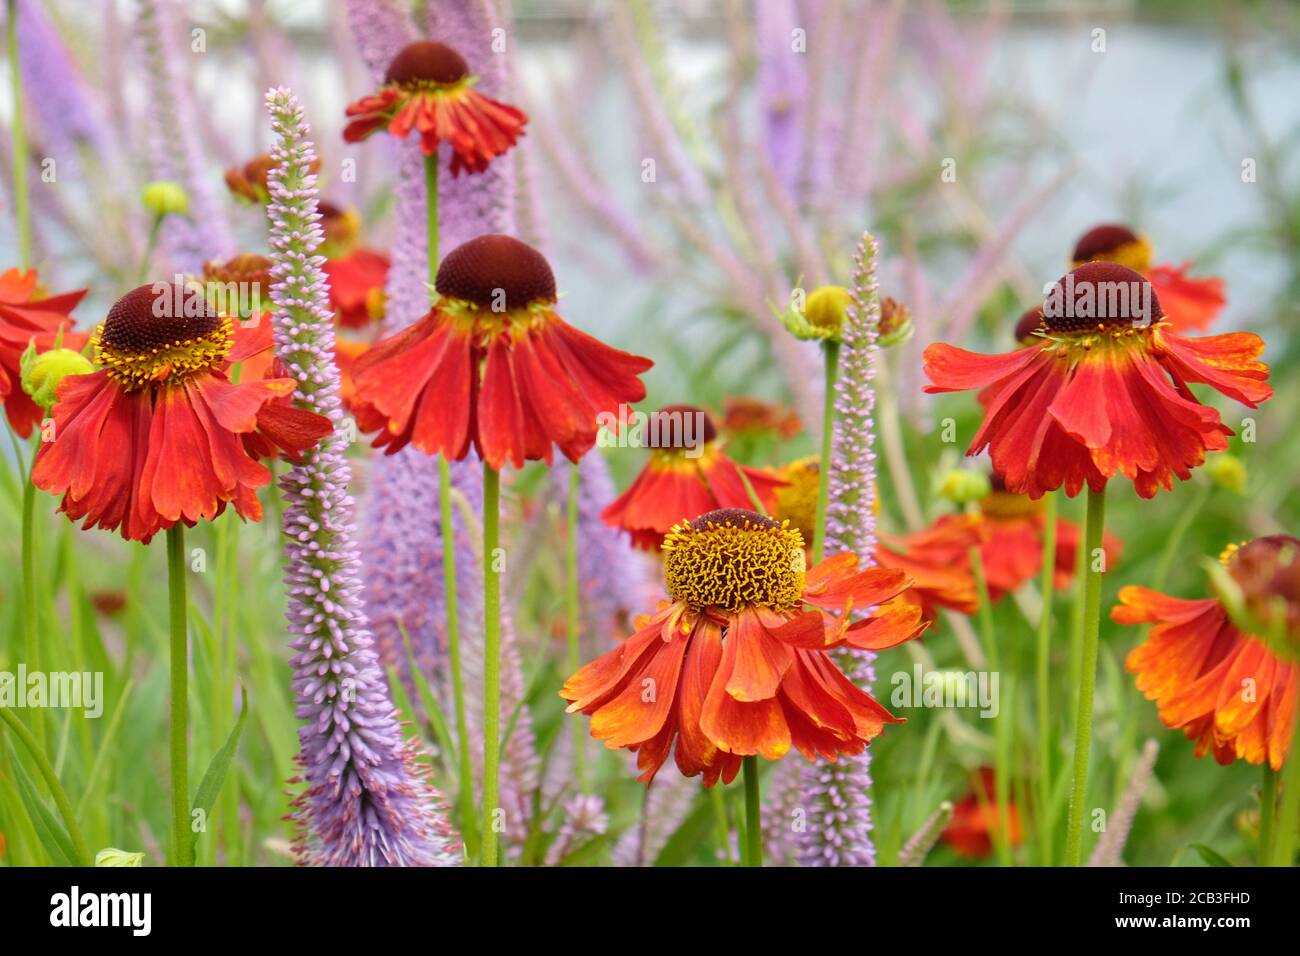 Helenium 'Moerheim Beauty' sneezeweed and purple spiked speedwell in flower during the summer months Stock Photo